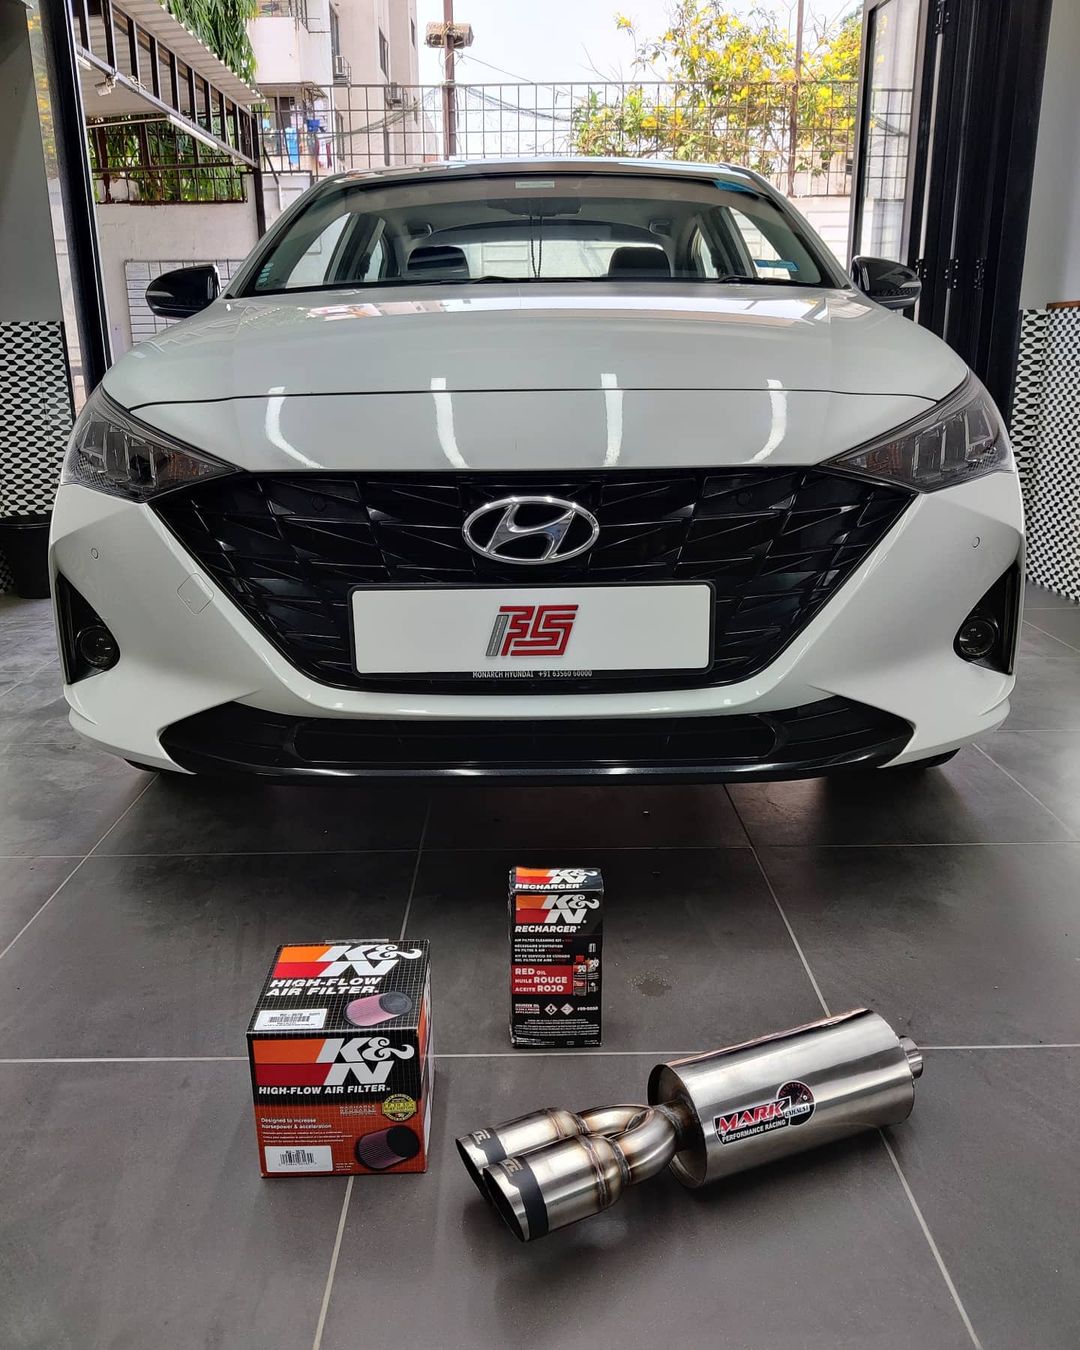 Verna 2020 performance exhaust upgraded with conical Air intake